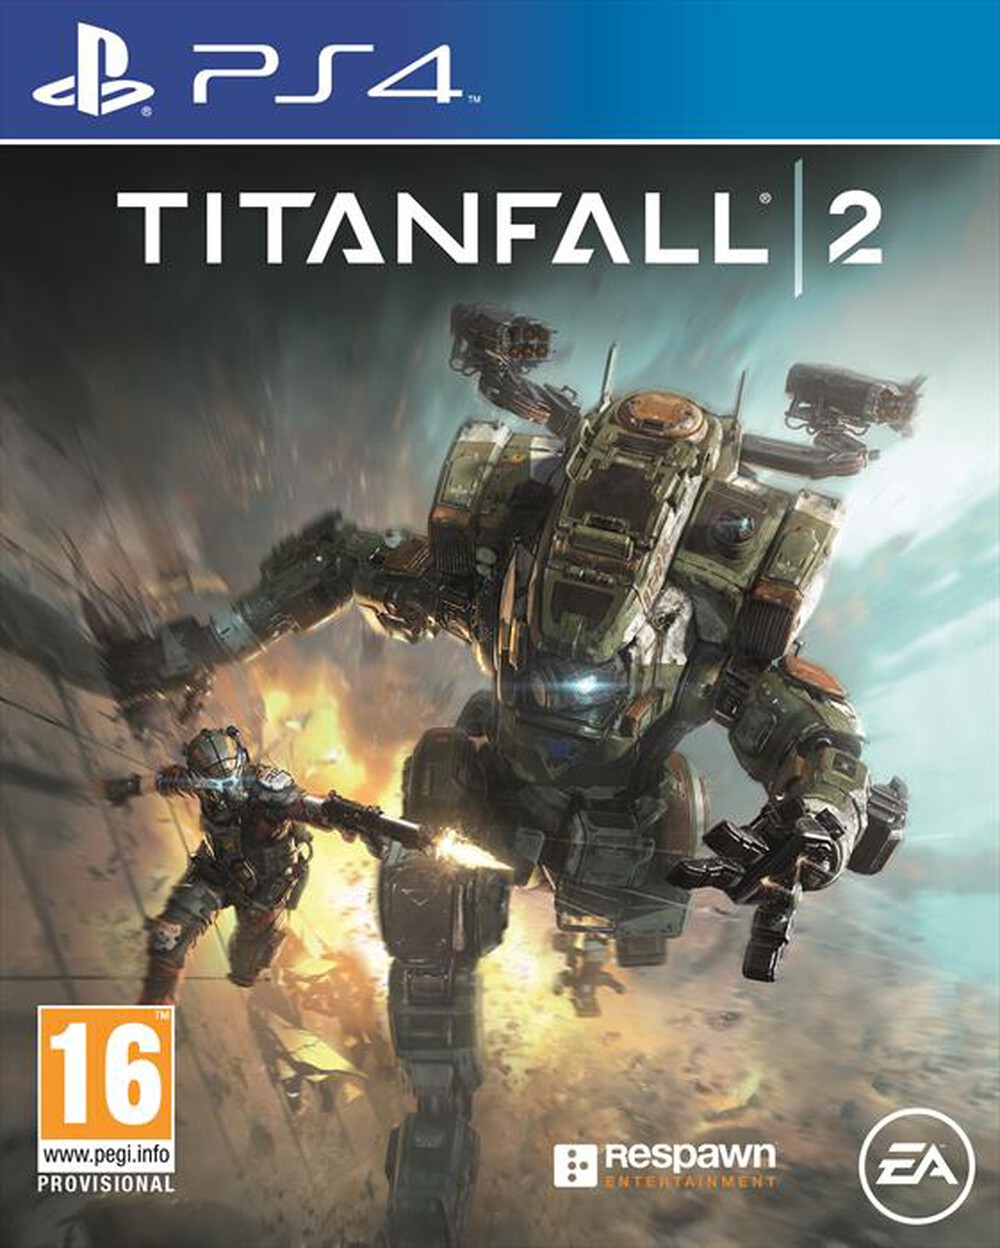 "ELECTRONIC ARTS - Titanfall 2 Ps4 - "